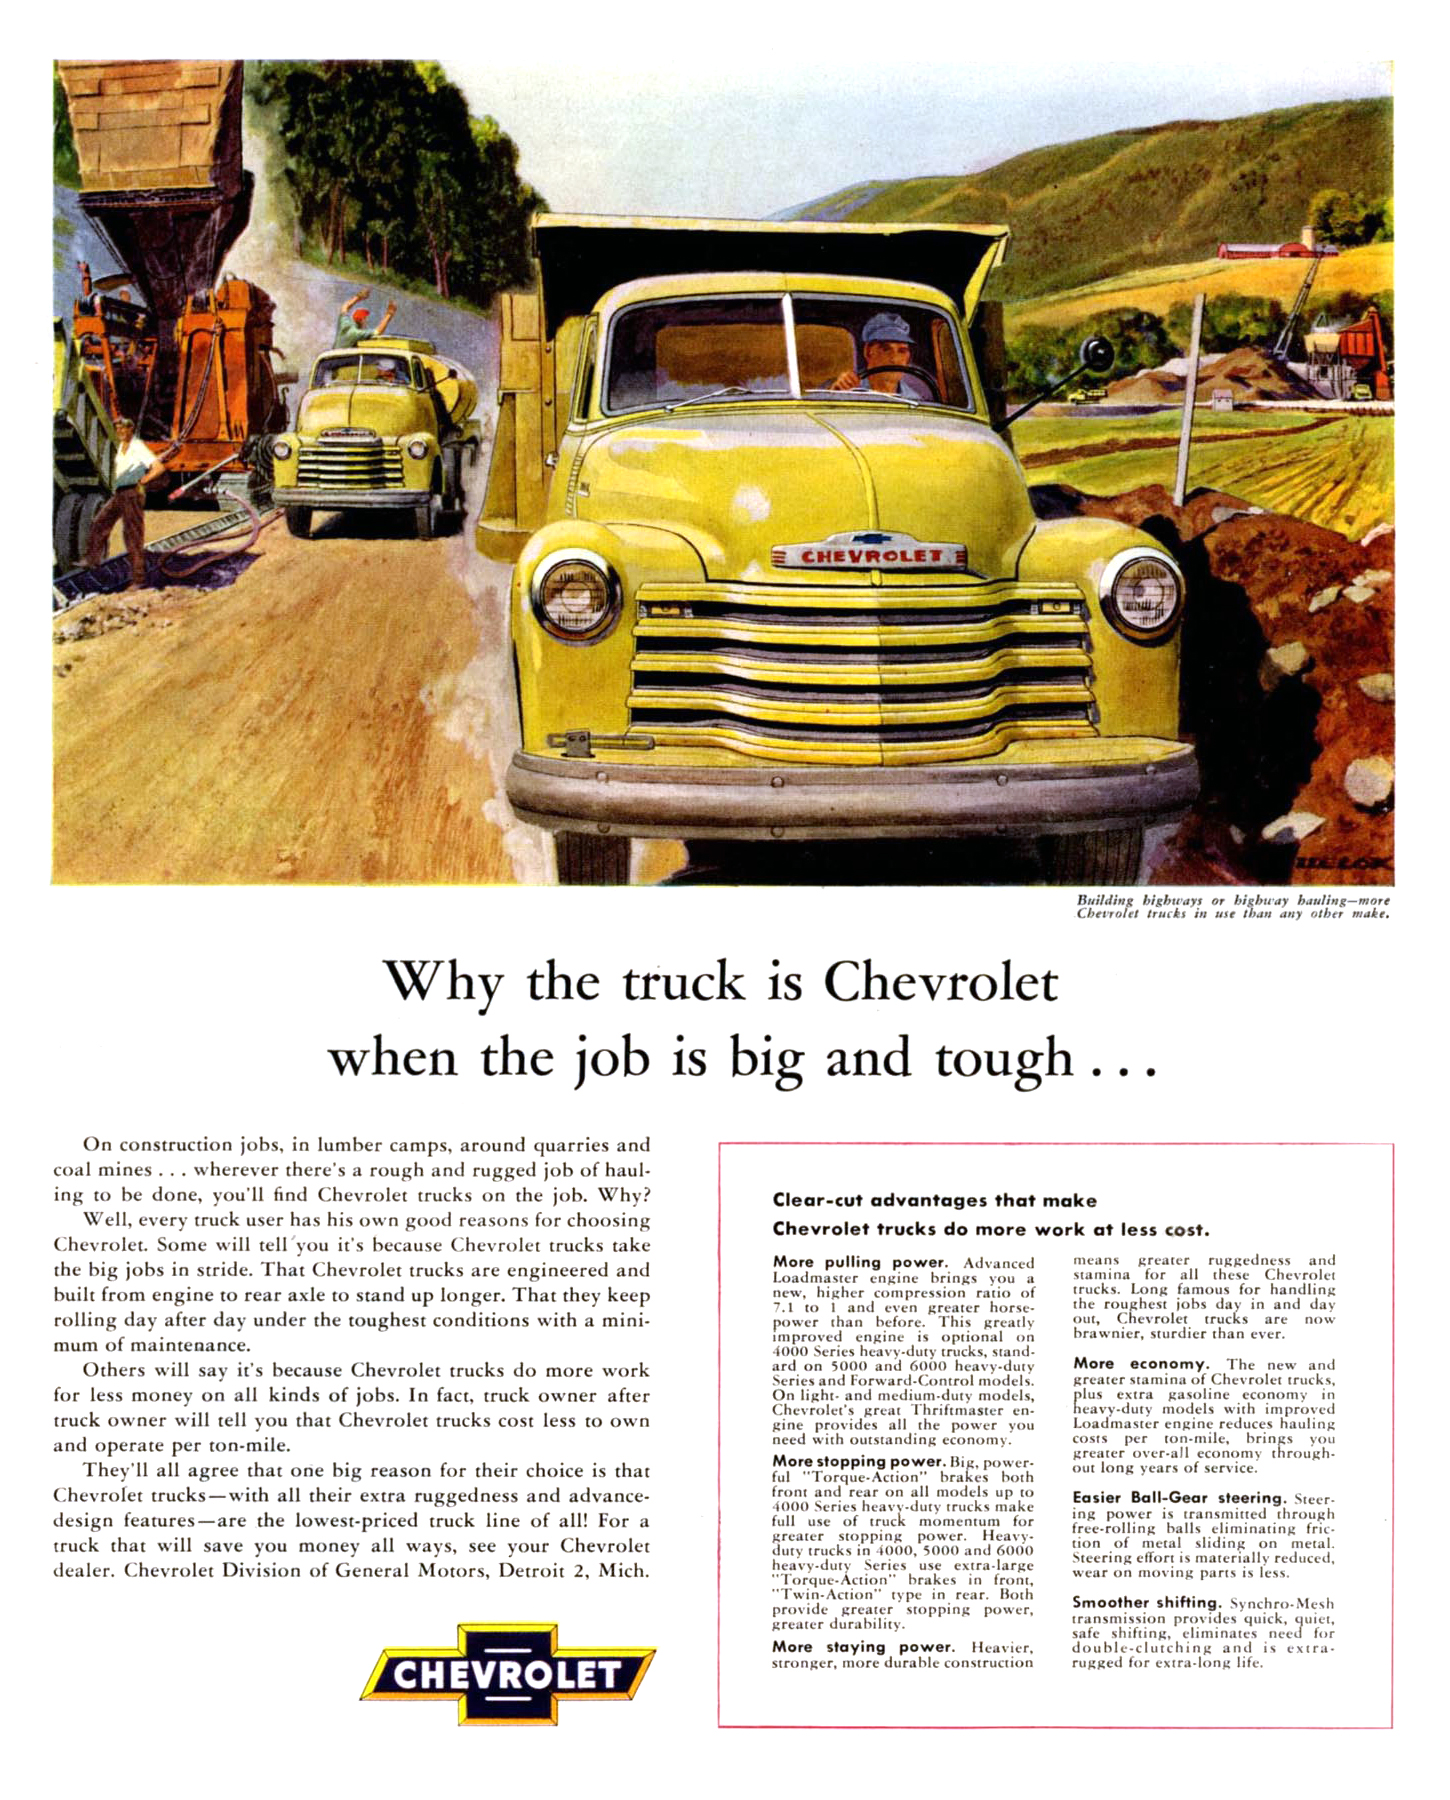 Chevrolet Trucks Ad (October, 1953): Illustrated by Peter Helck